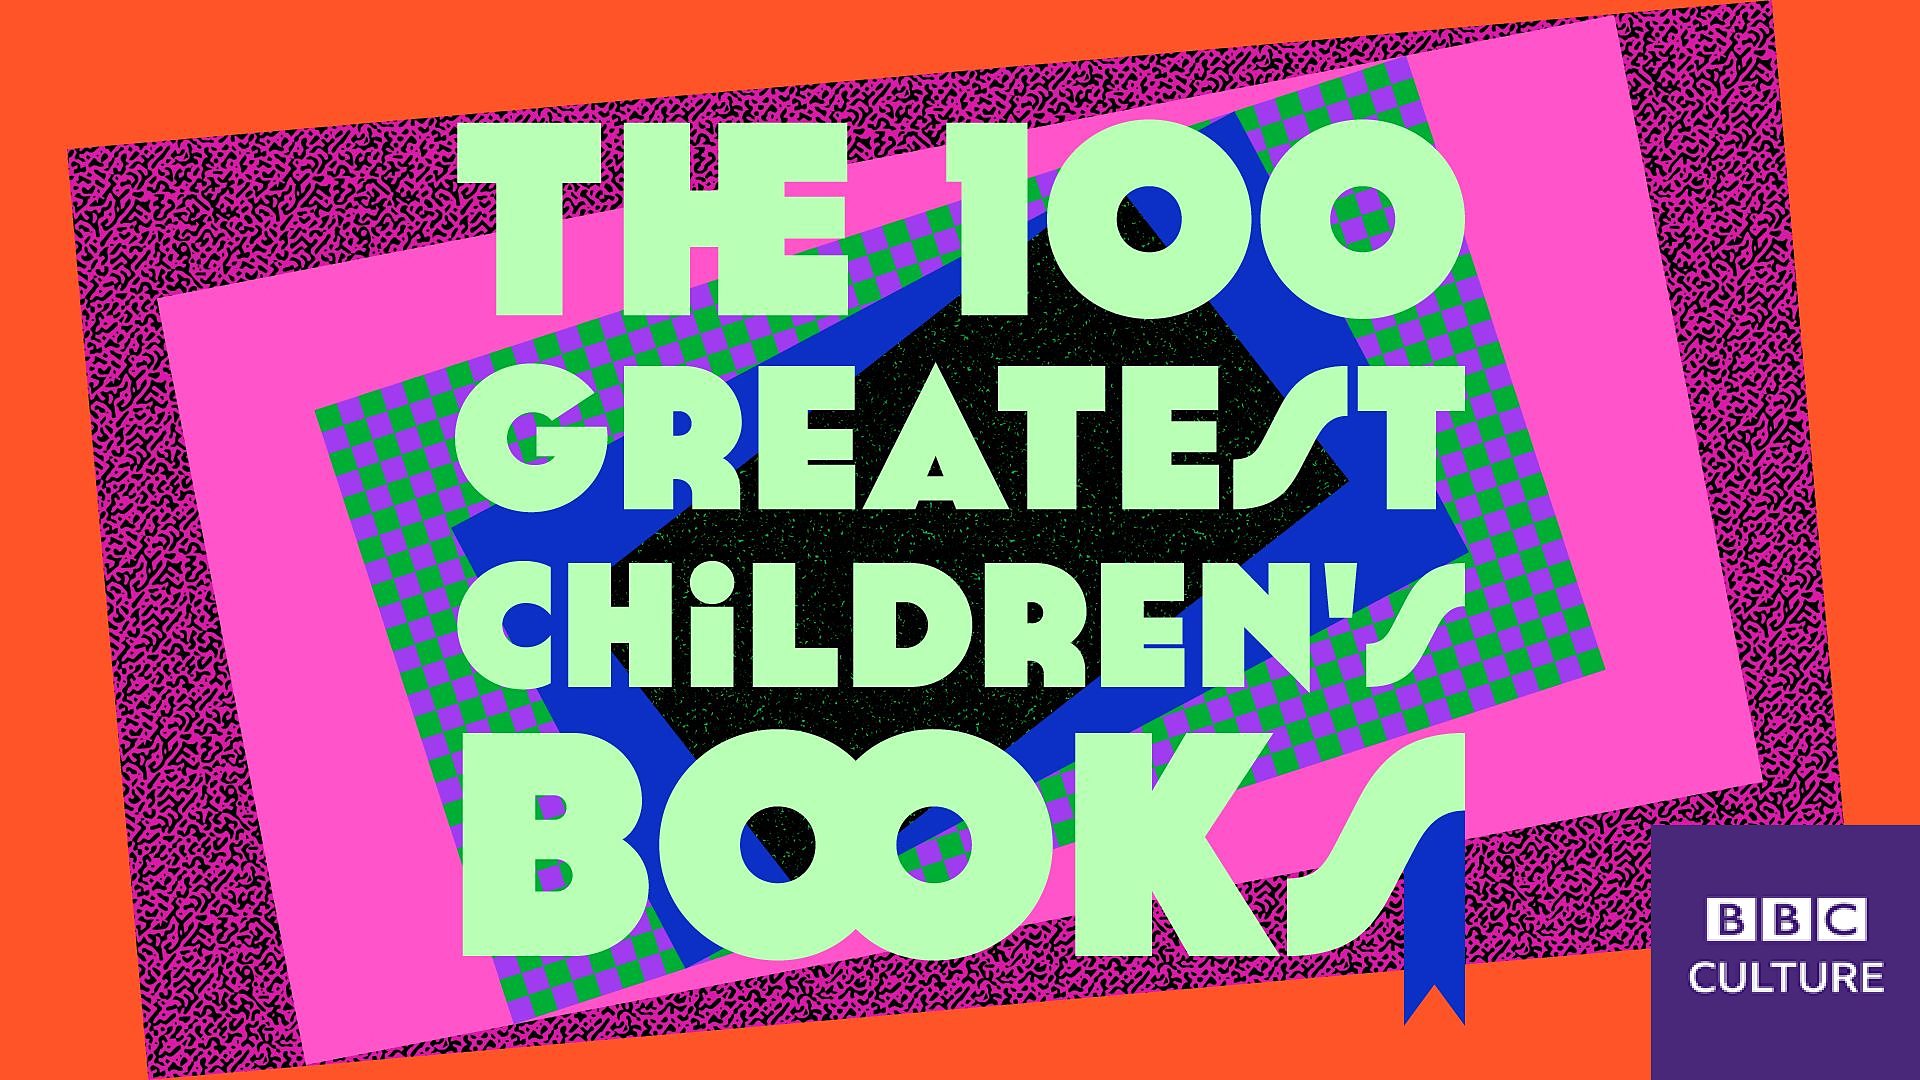 BBC Culture reveals 100 greatest children's books of all time